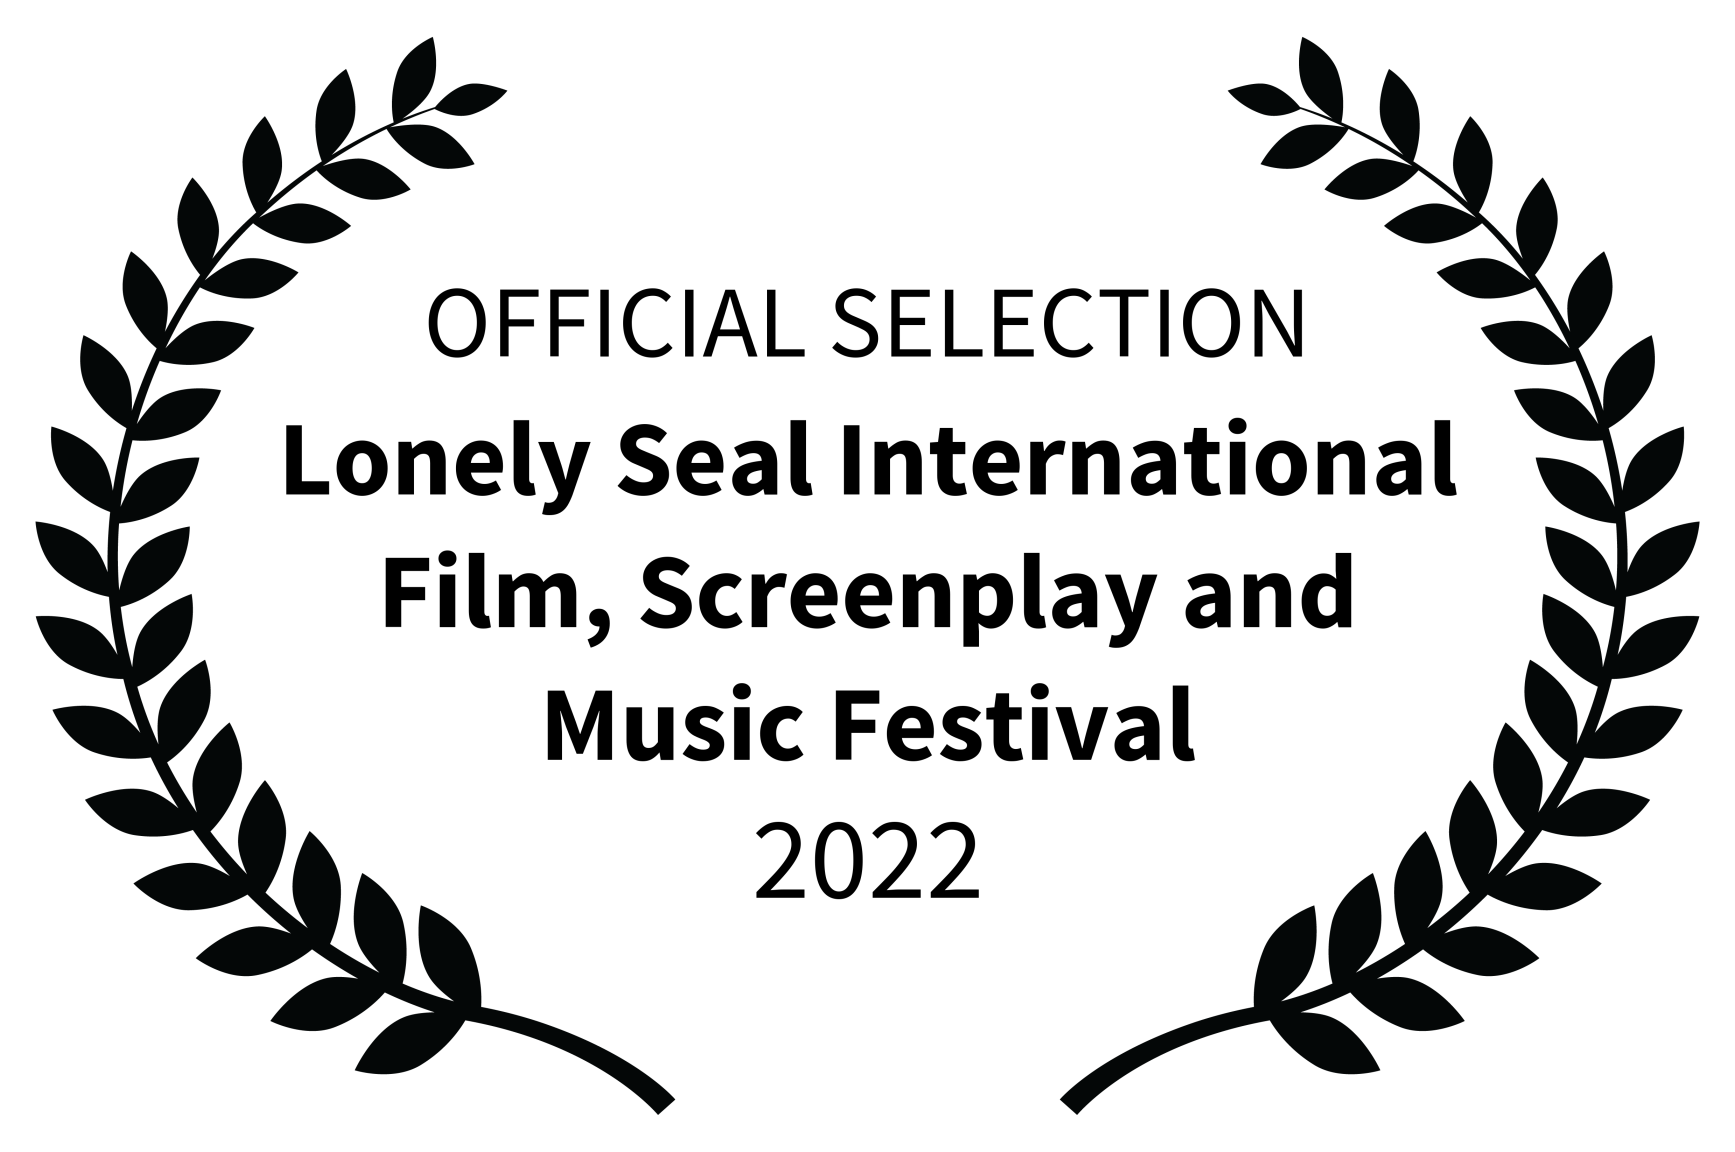 OFFICIAL SELECTION - Lonely Seal International Film Screenplay and Music Festival - 2022